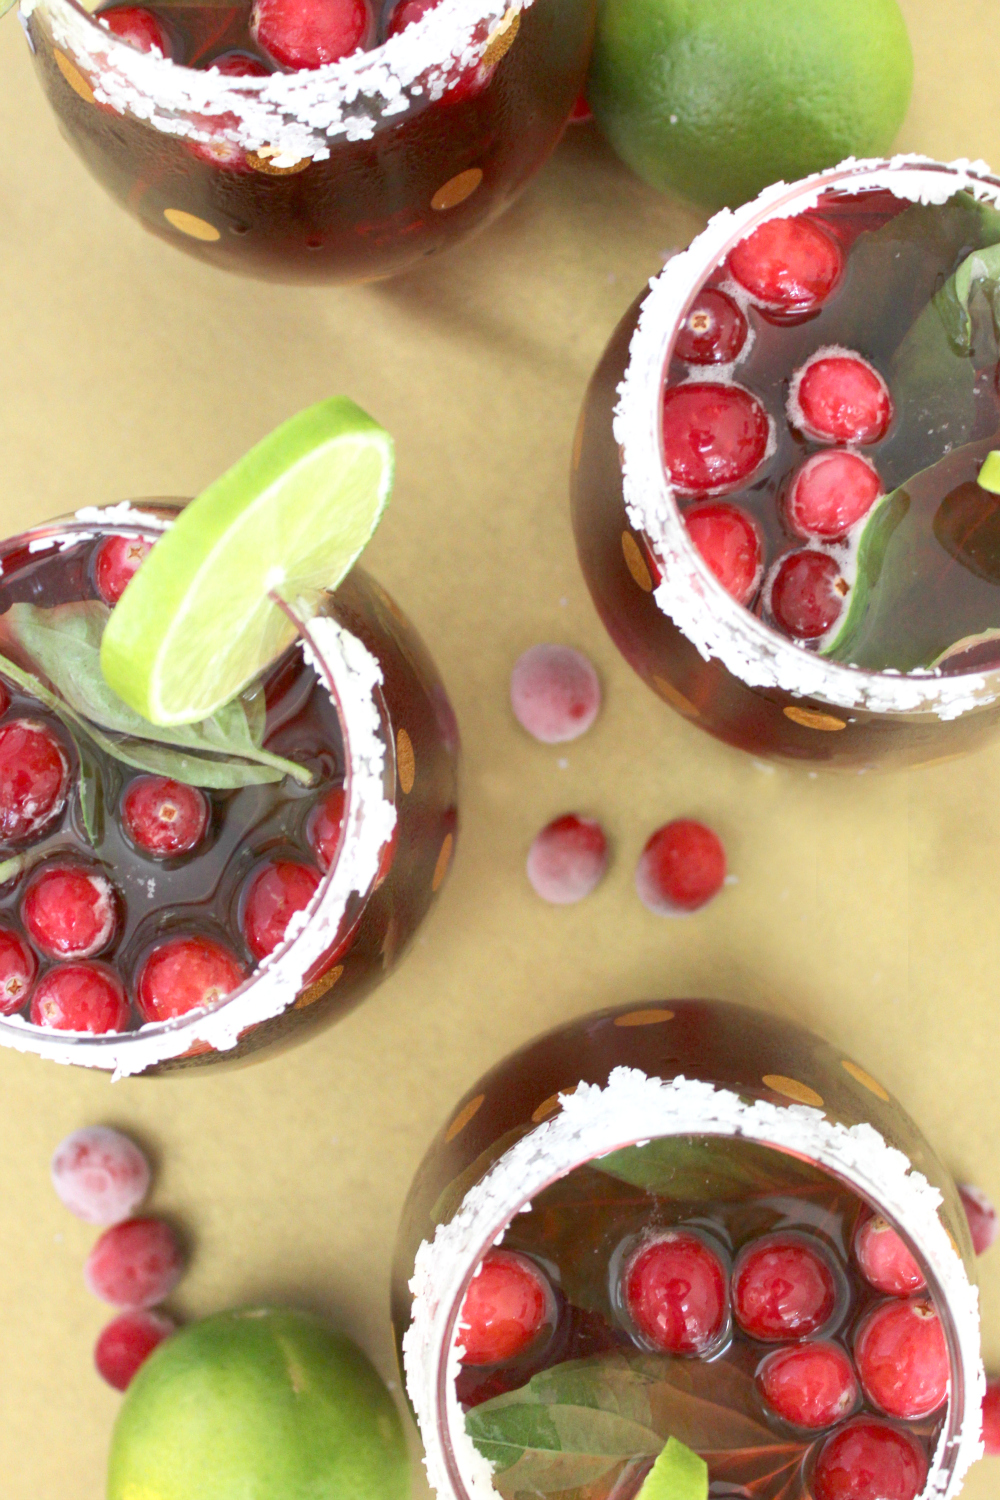 Festive cranberry basil margarita recipe made with Hornitos Tequila by southern blogger Stephanie Ziajka from Diary of a Debutante